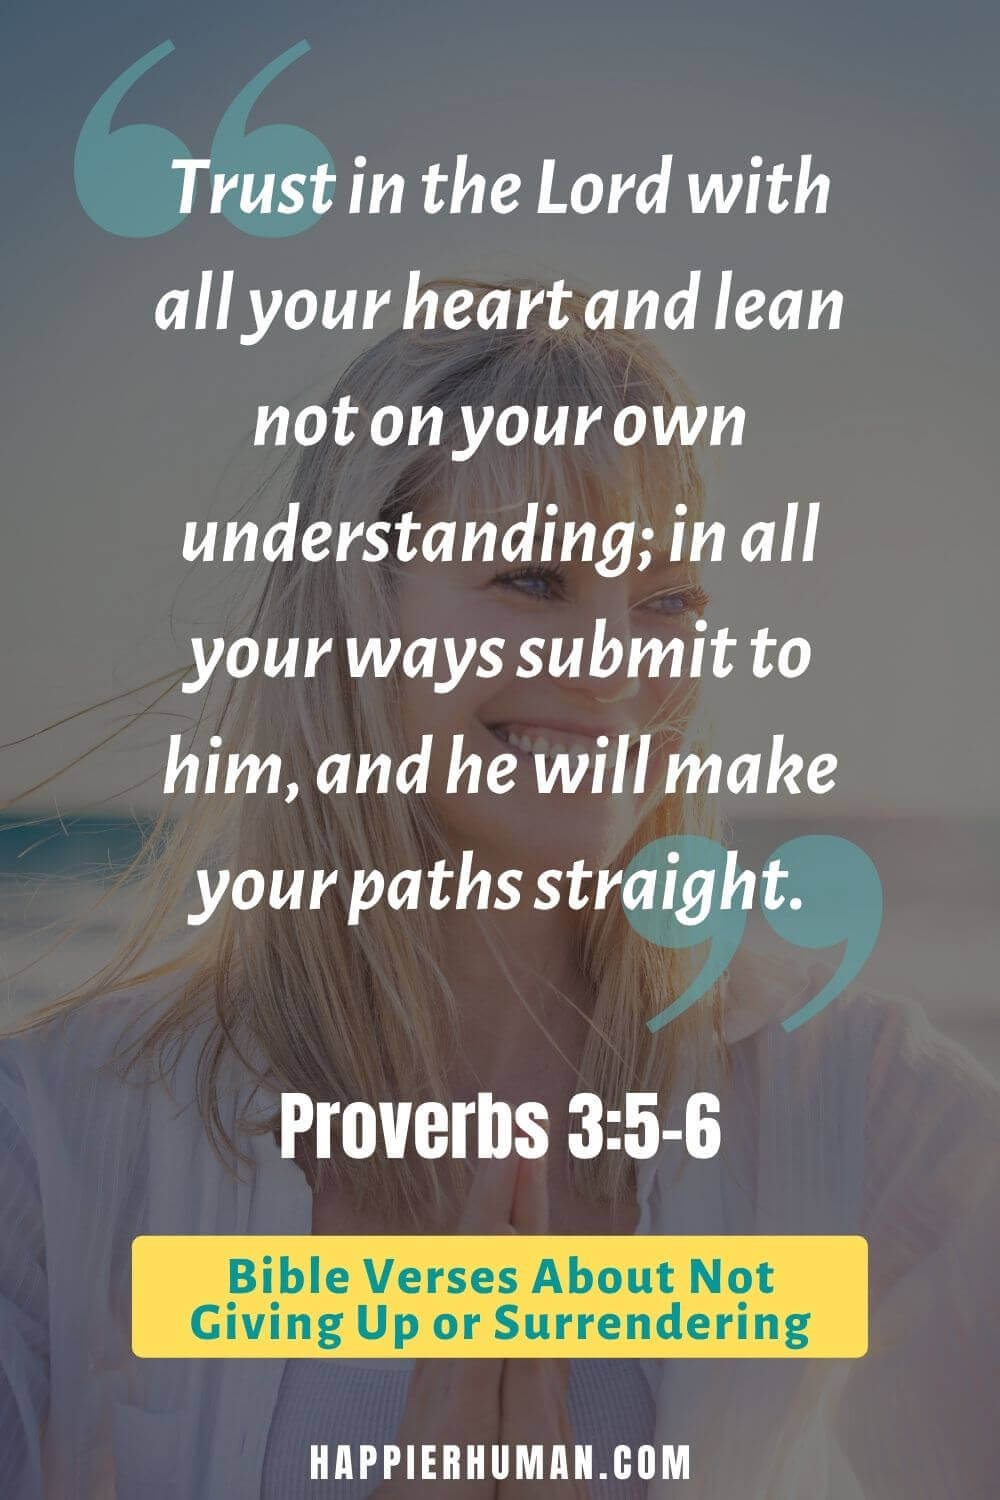 Bible Verses About Not Giving up - Proverbs 3:5-6 says, “Trust in the Lord with all your heart and lean not on your own understanding; in all your ways submit to him, and he will make your paths straight.” | bible verse always pray and never give up | bible characters who didnt give up | bible verse about not giving up tagalog